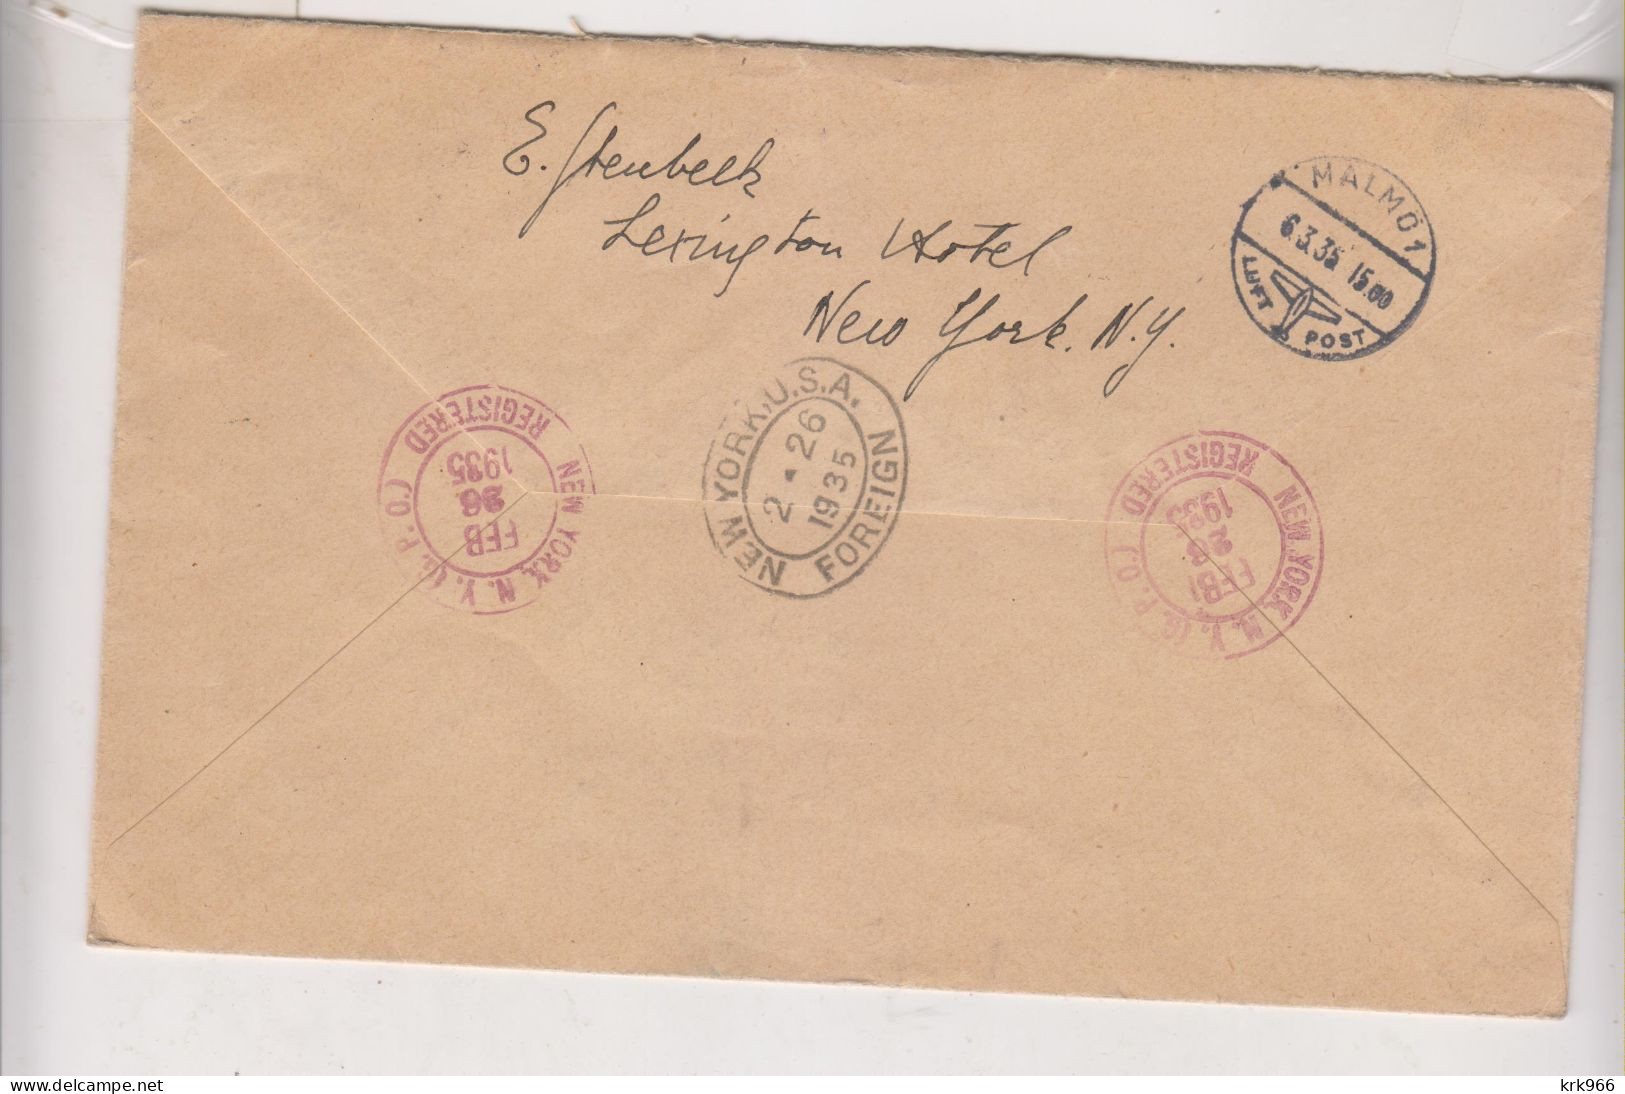 UNITED STATES 1935 NEW YORK Registered Airmail Cover To SWEDEN Special Delivery - 1c. 1918-1940 Covers